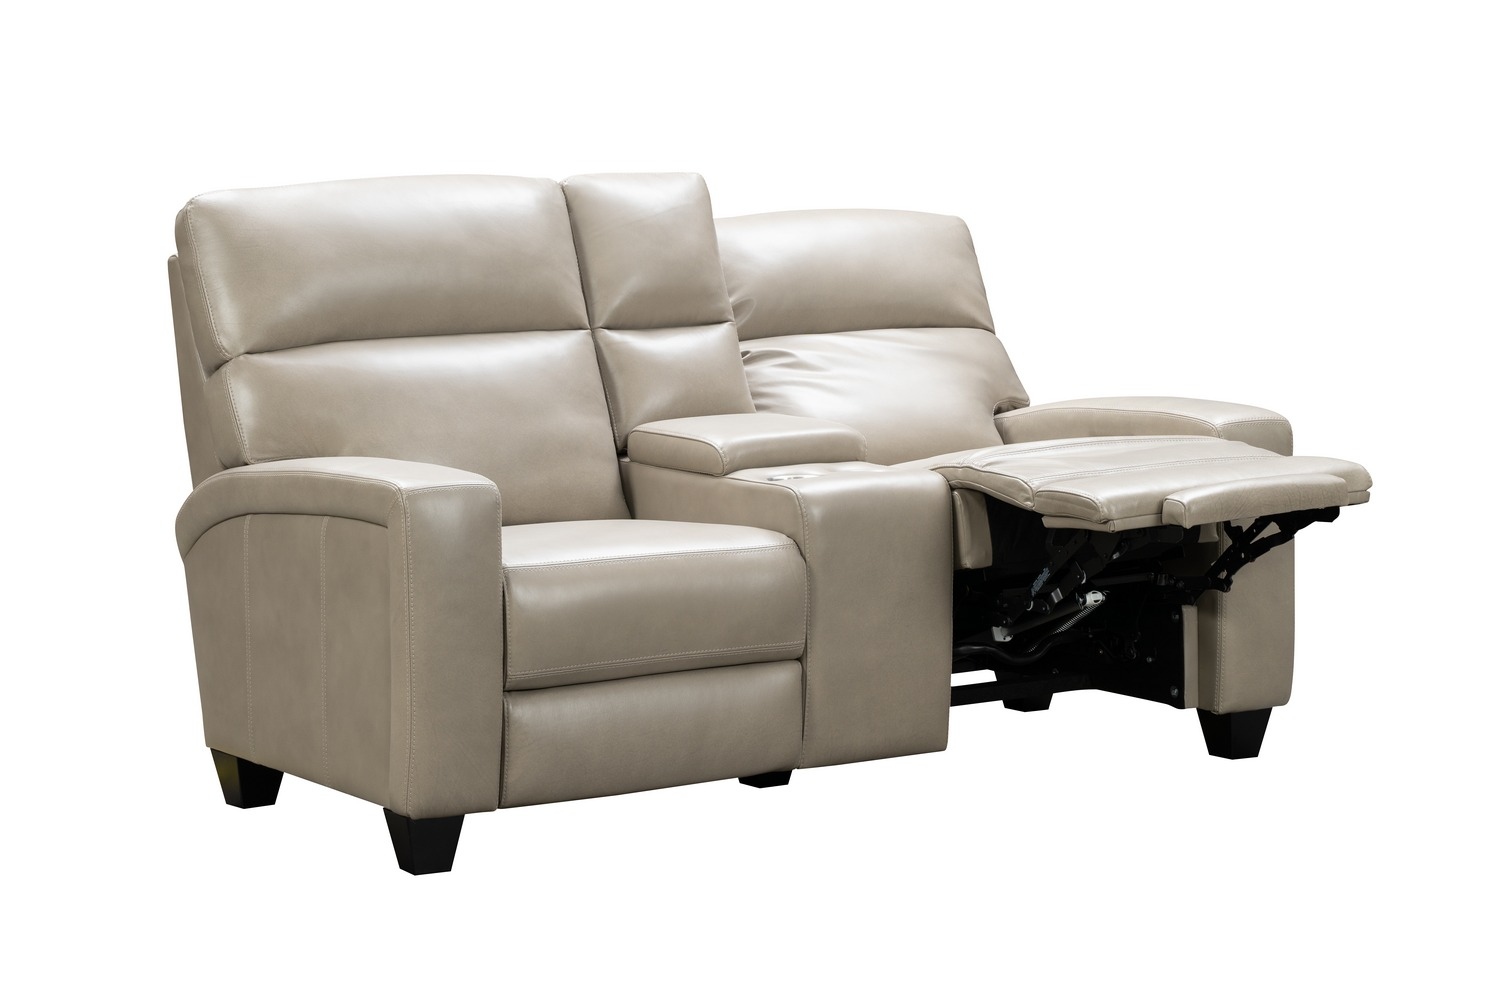 Barcalounger Macello Power Reclining Console Loveseat with Power Head Rests and Power Lumbar - Sergi Gray Beige/Leather Match